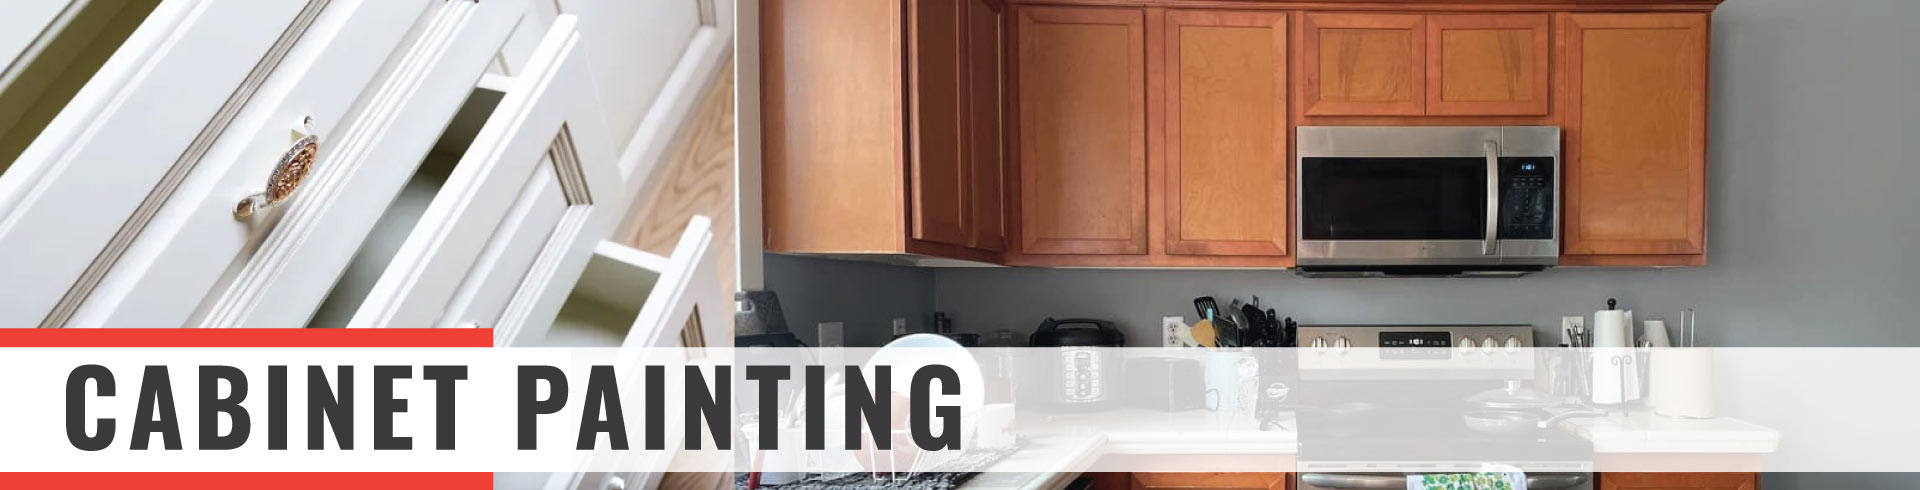 cabinet painting professionals in oregon